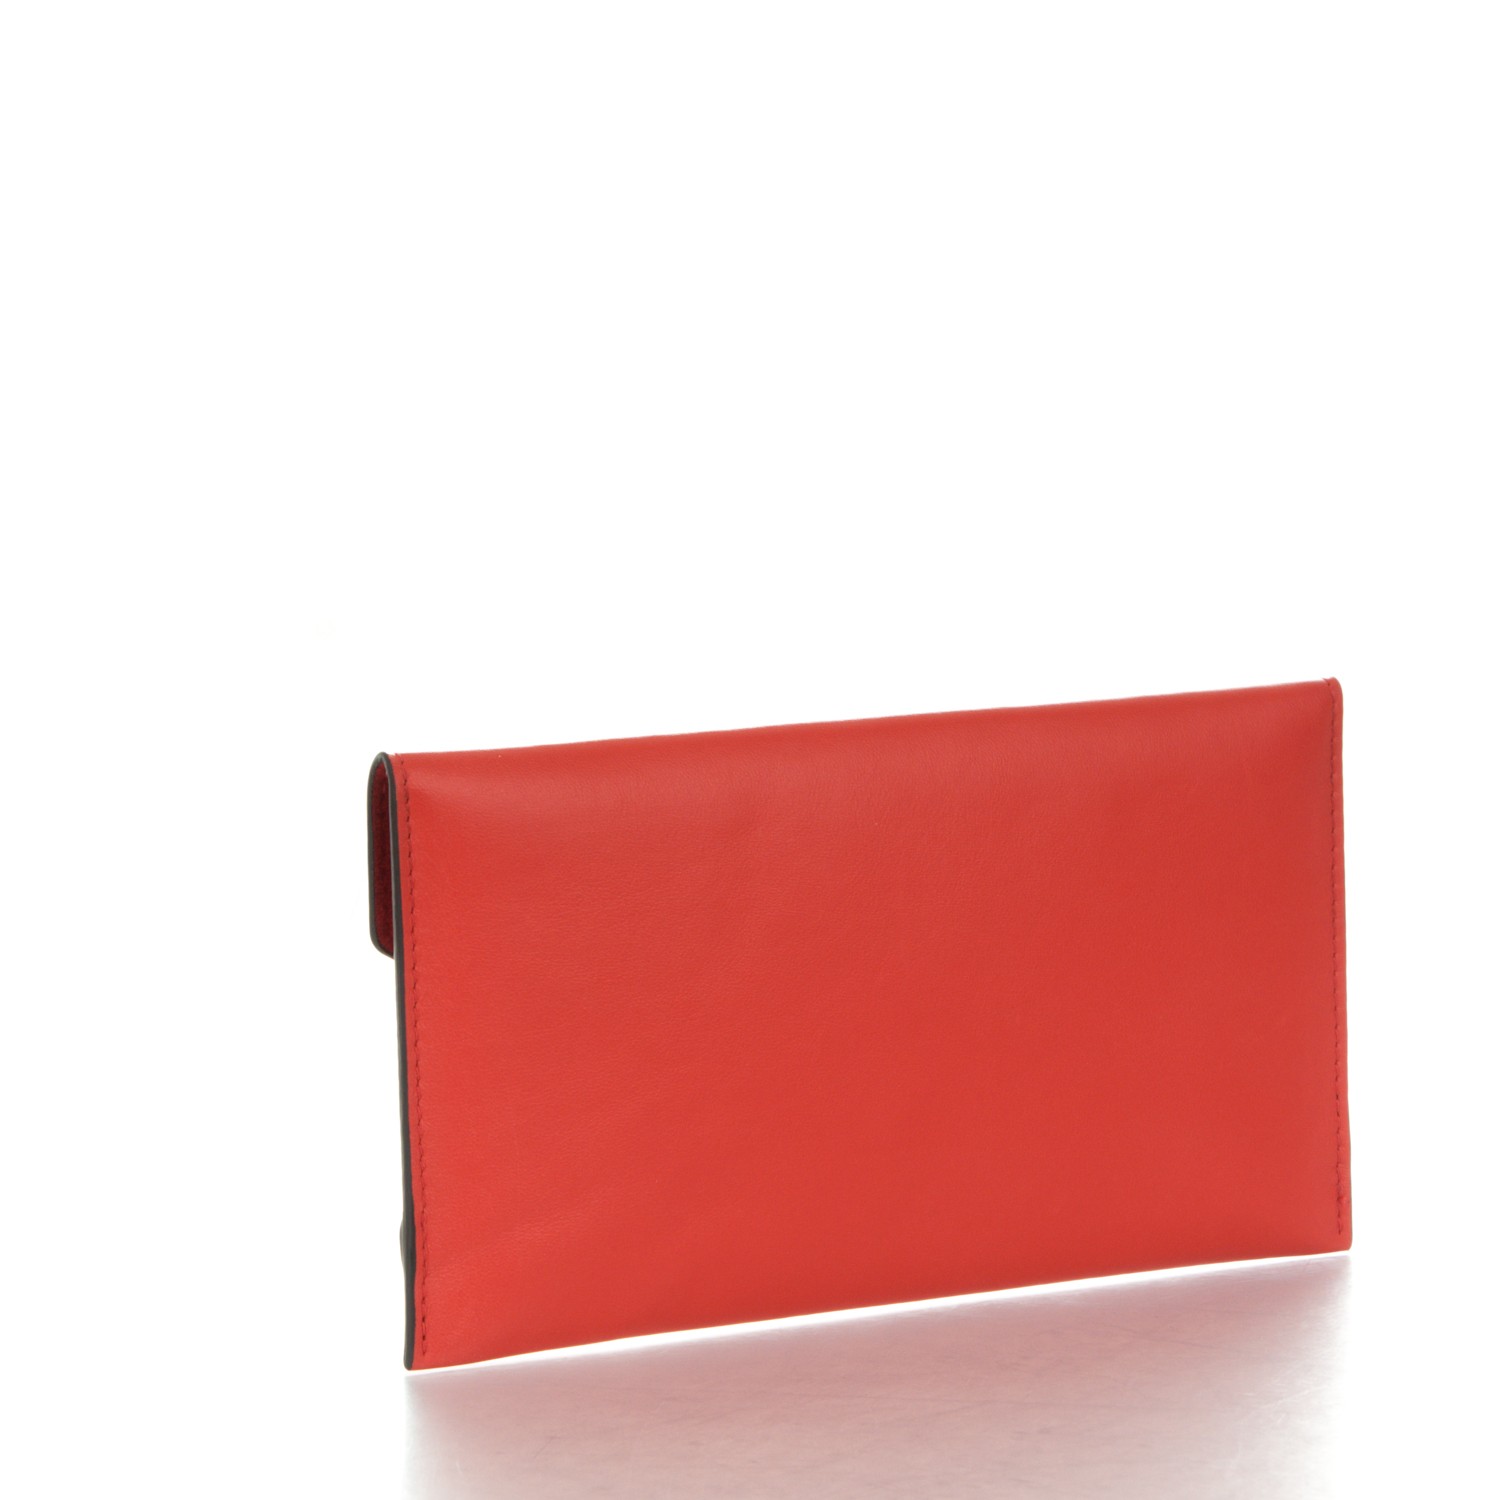 Louis Vuitton Chinese New Year Envelope Kit - Red Books